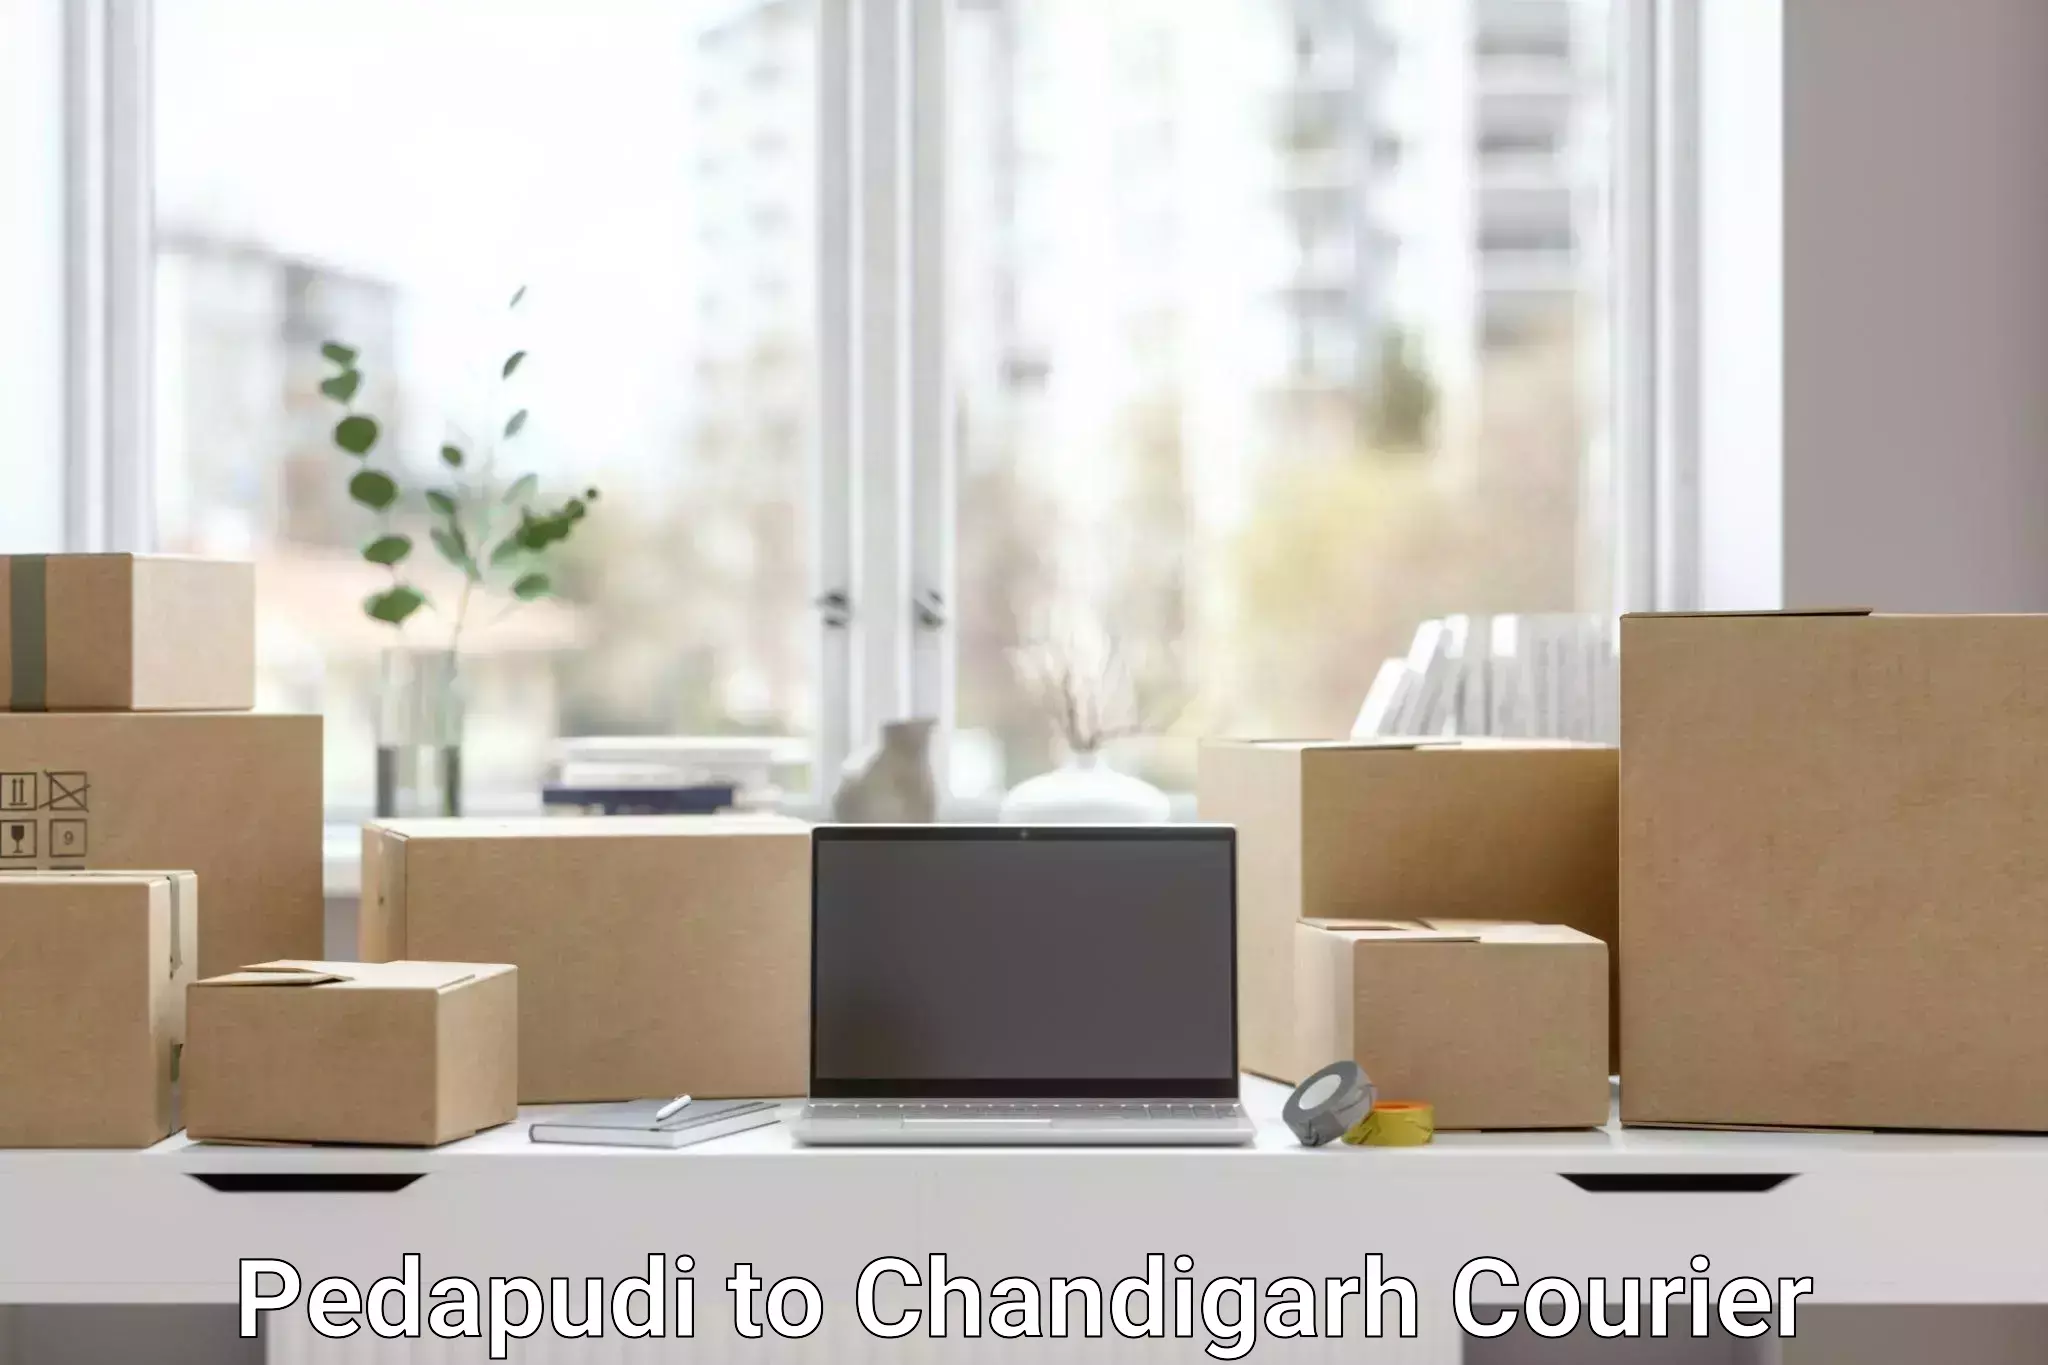 Custom courier packages Pedapudi to Panjab University Chandigarh